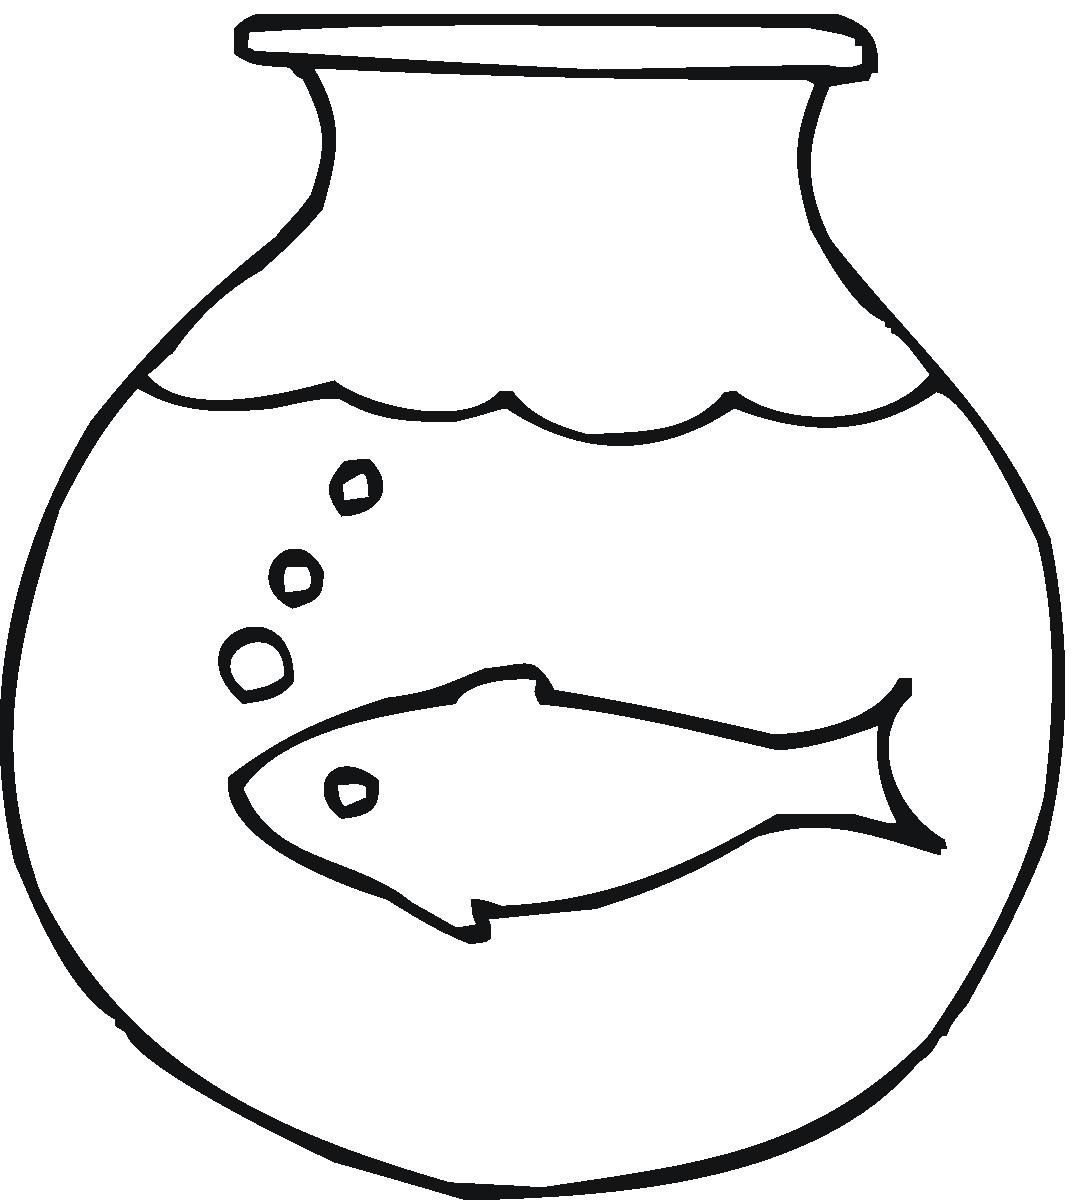 Fish black and white fish bowl clipart black and white free.